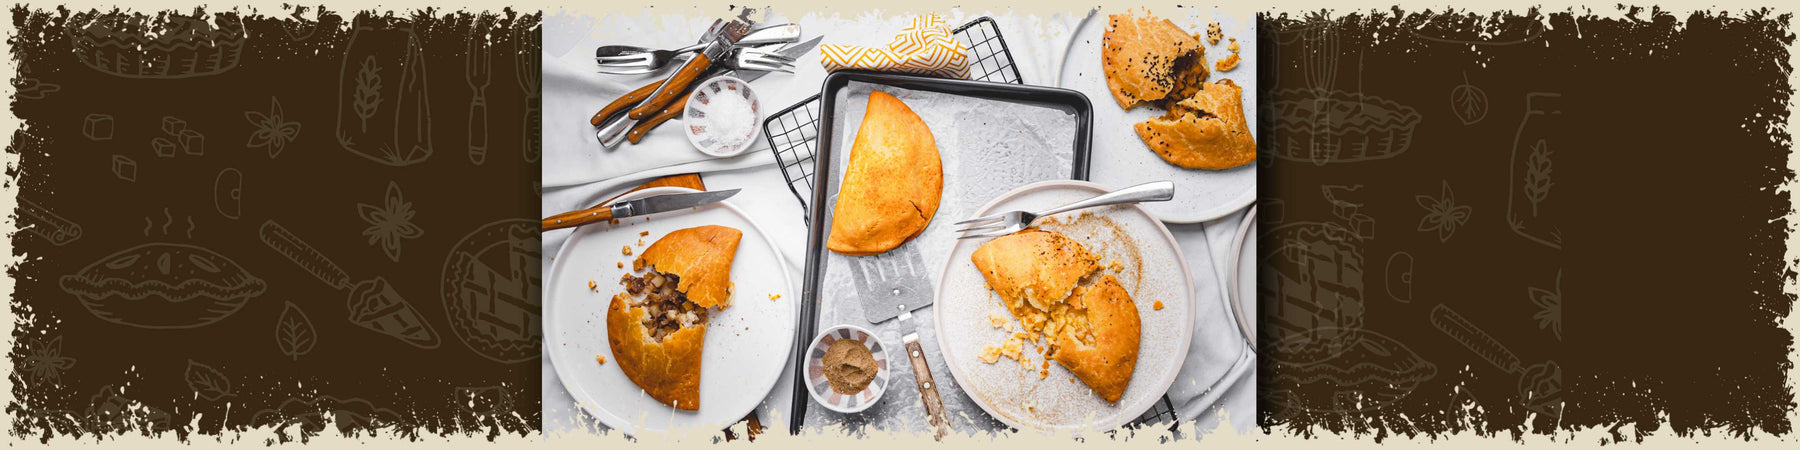 The Rise of Gluten-free: Why Our Pasties Are The Future of Comfort Food